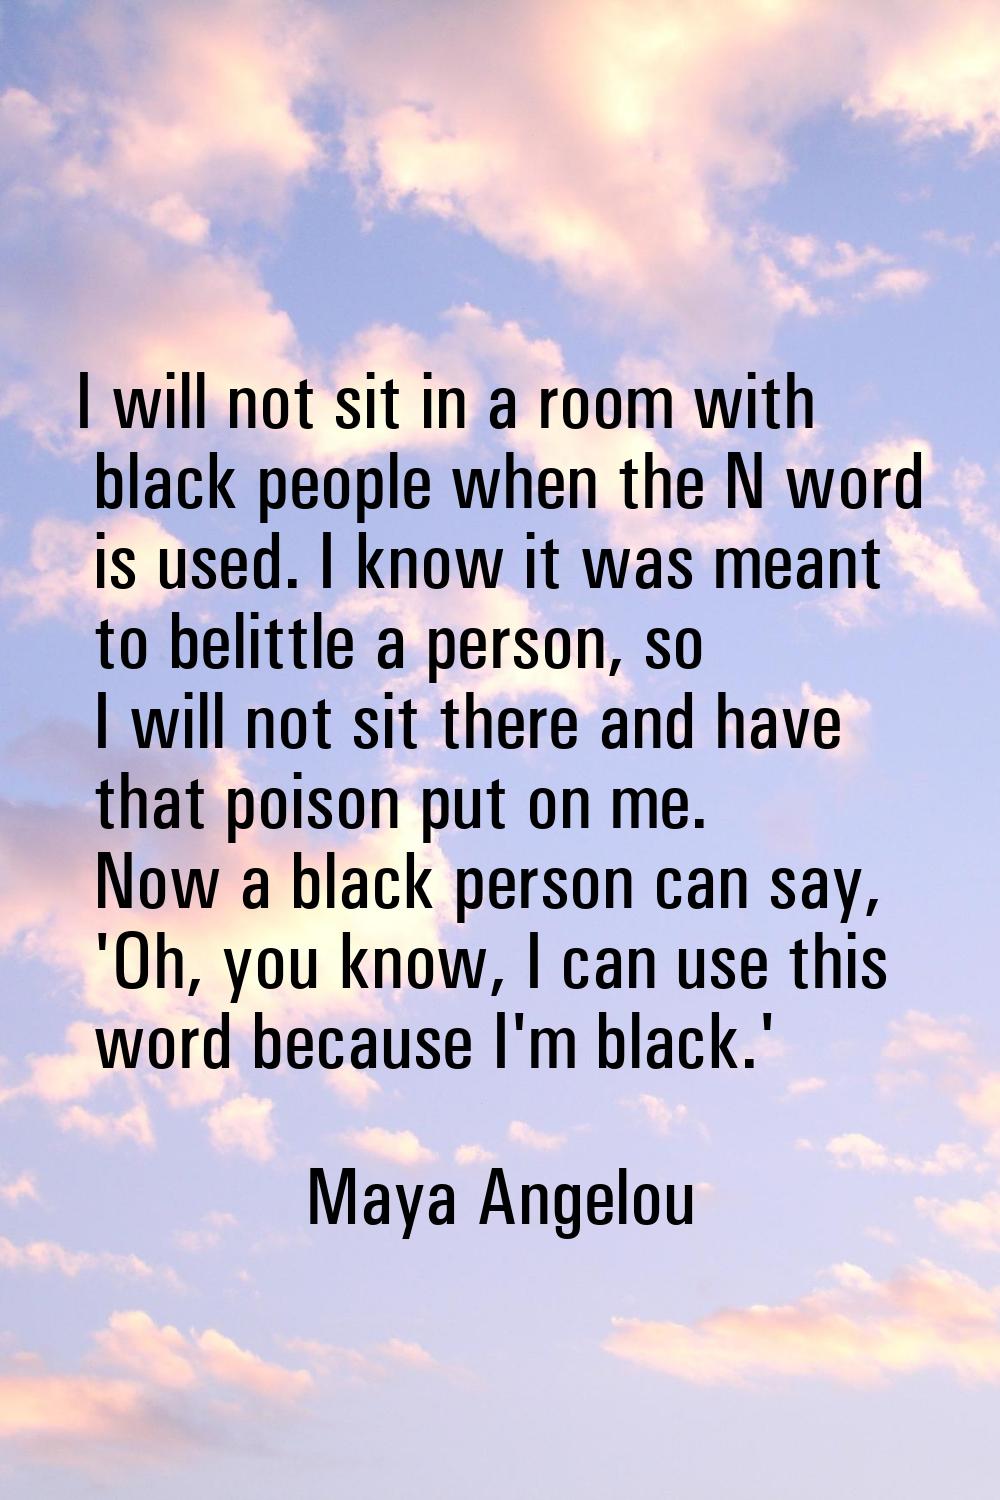 I will not sit in a room with black people when the N word is used. I know it was meant to belittle